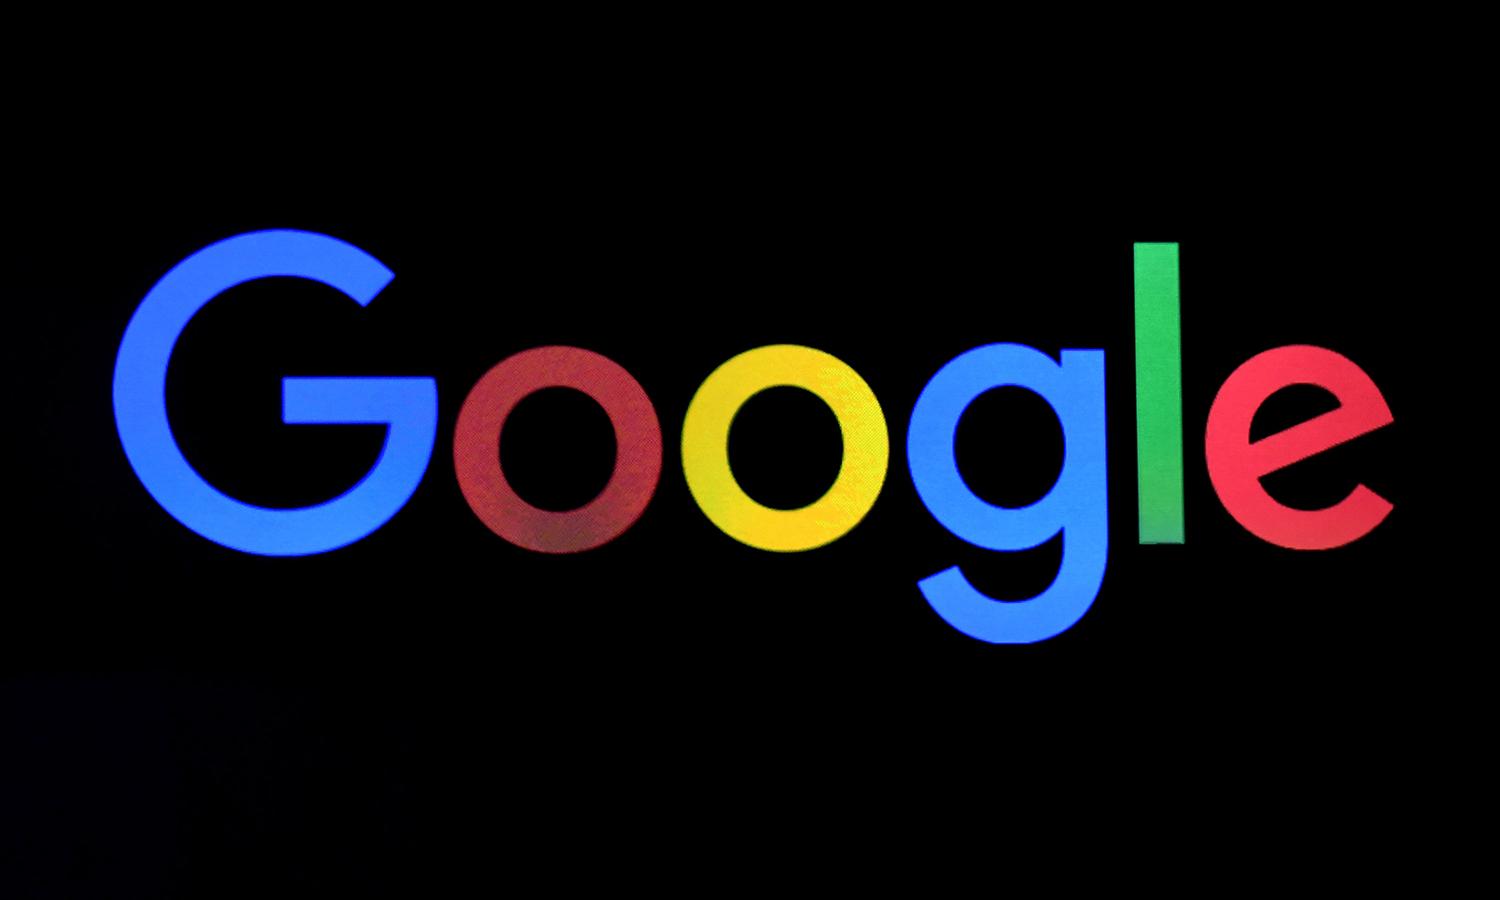 A Google logo is shown on a screen during a keynote address.